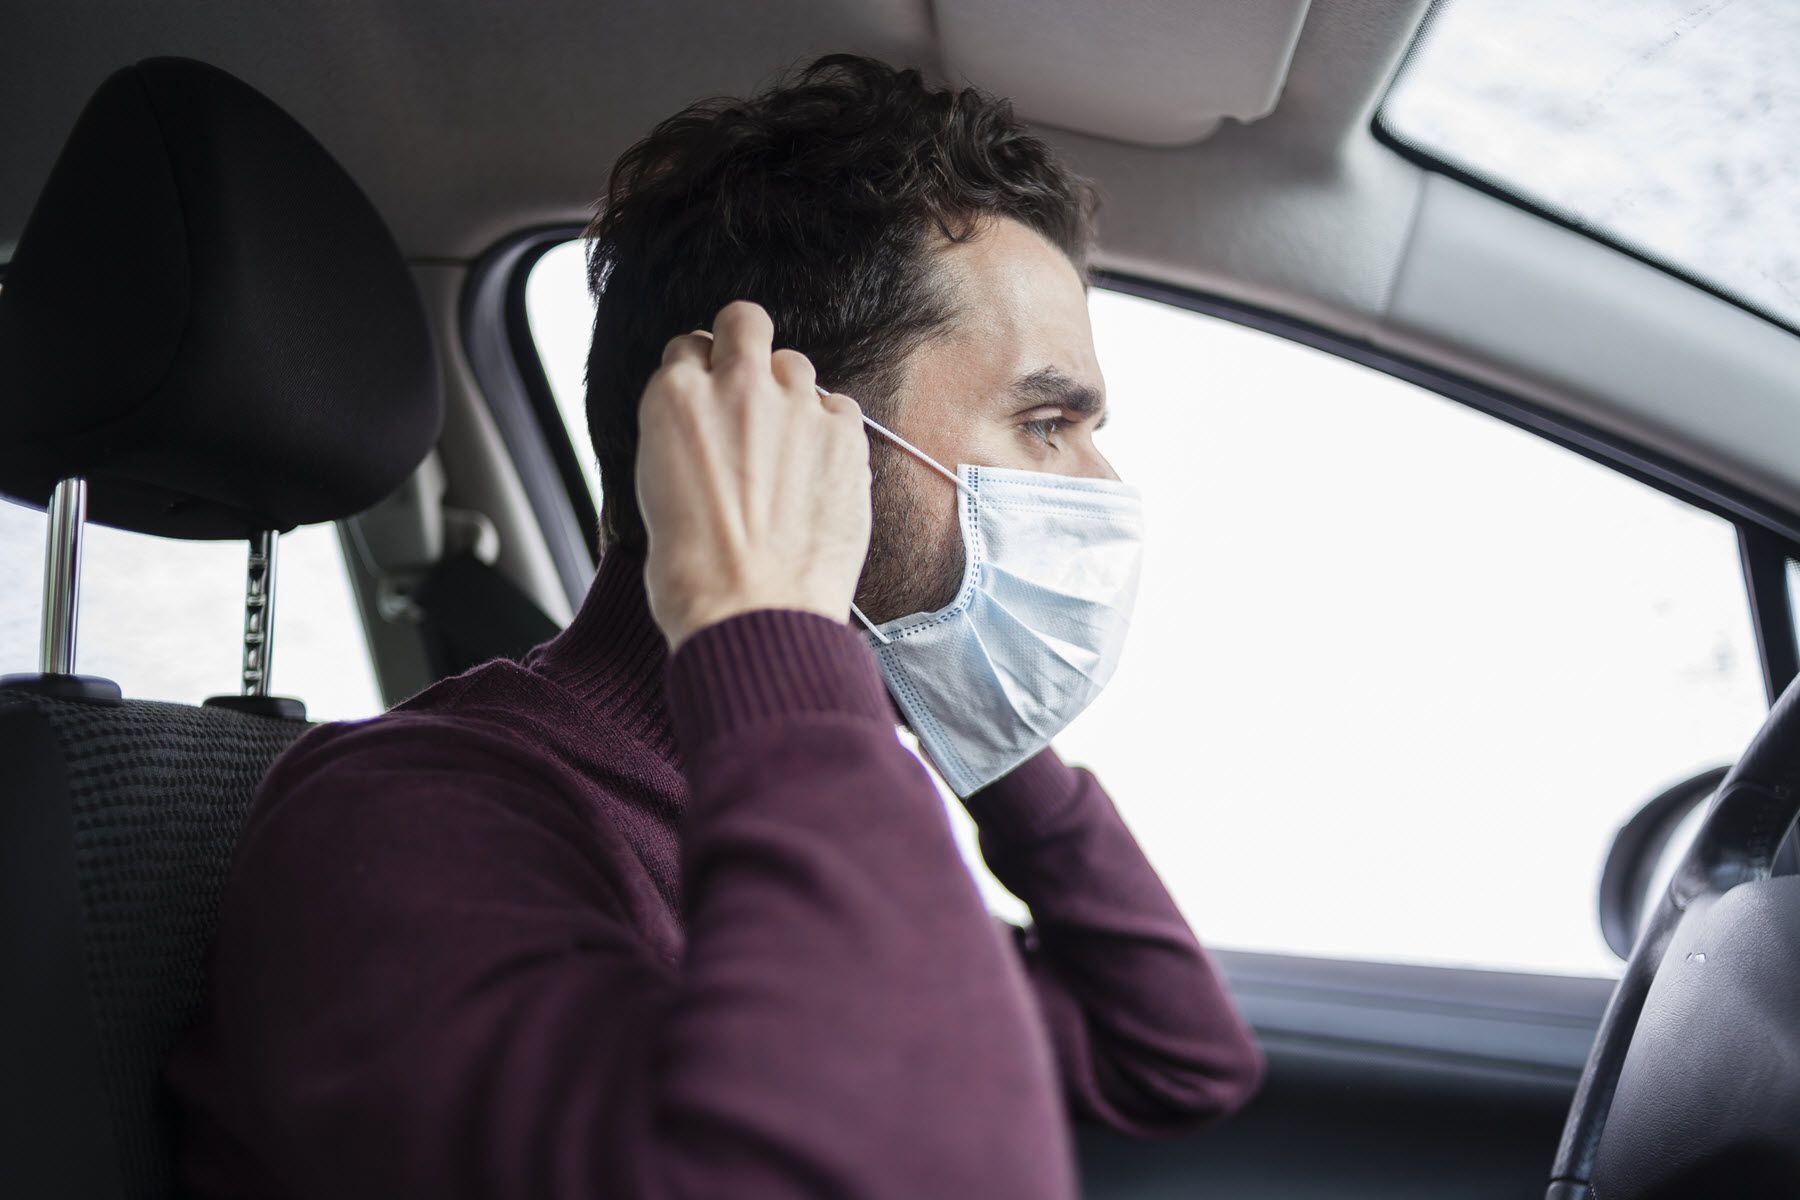 Coronavirus Delhi Updates: Delhi High Court on Wednesday made wearing of mask mandatory even if a person is driving alone.